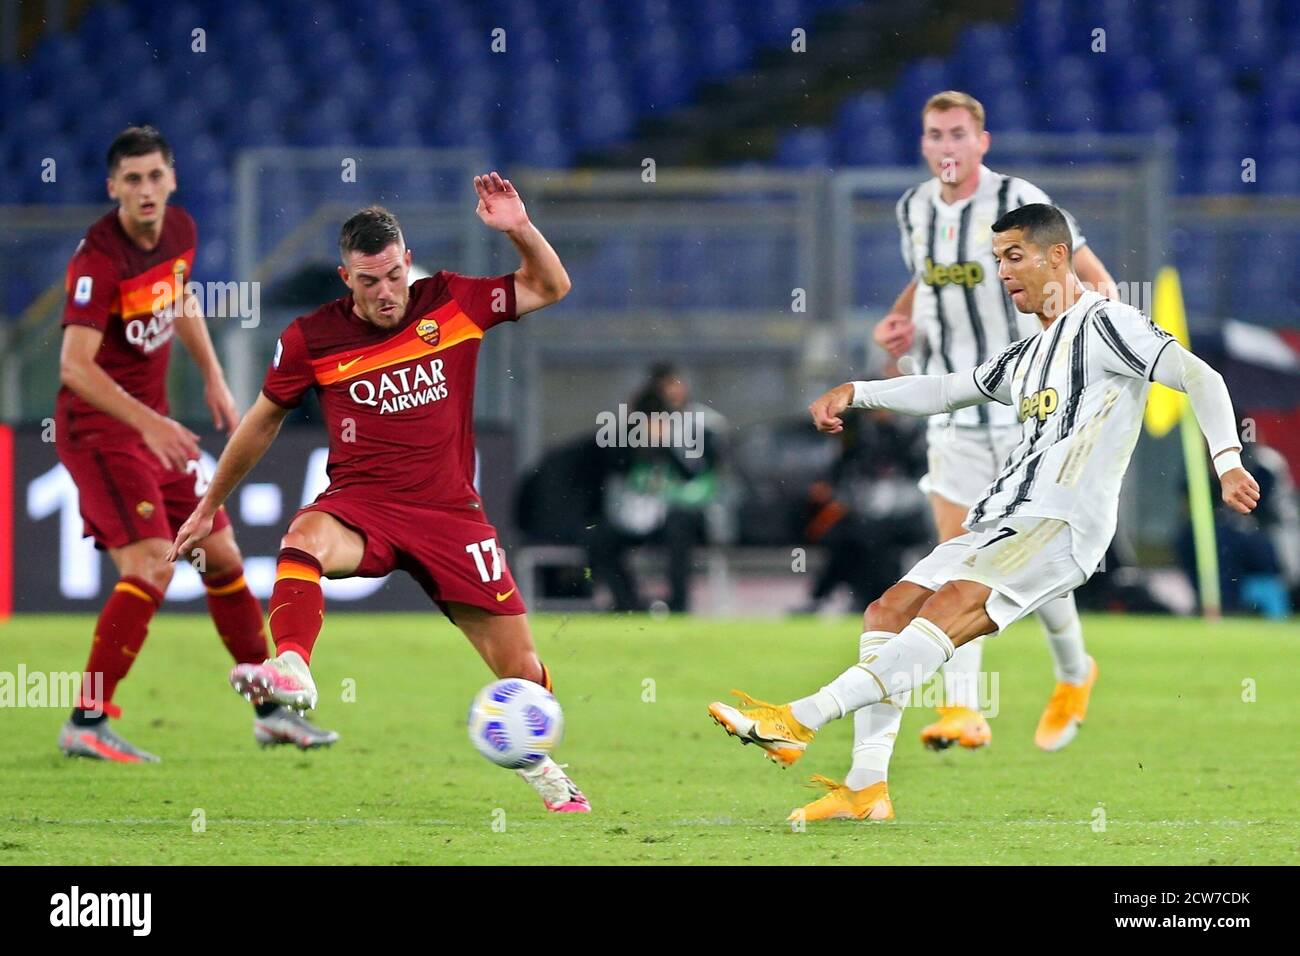 Jordan Veretout of Roma (L) and Cristiano Ronaldo of Juventus in action during the Italian championship Serie A football match between AS Roma and Juv Stock Photo